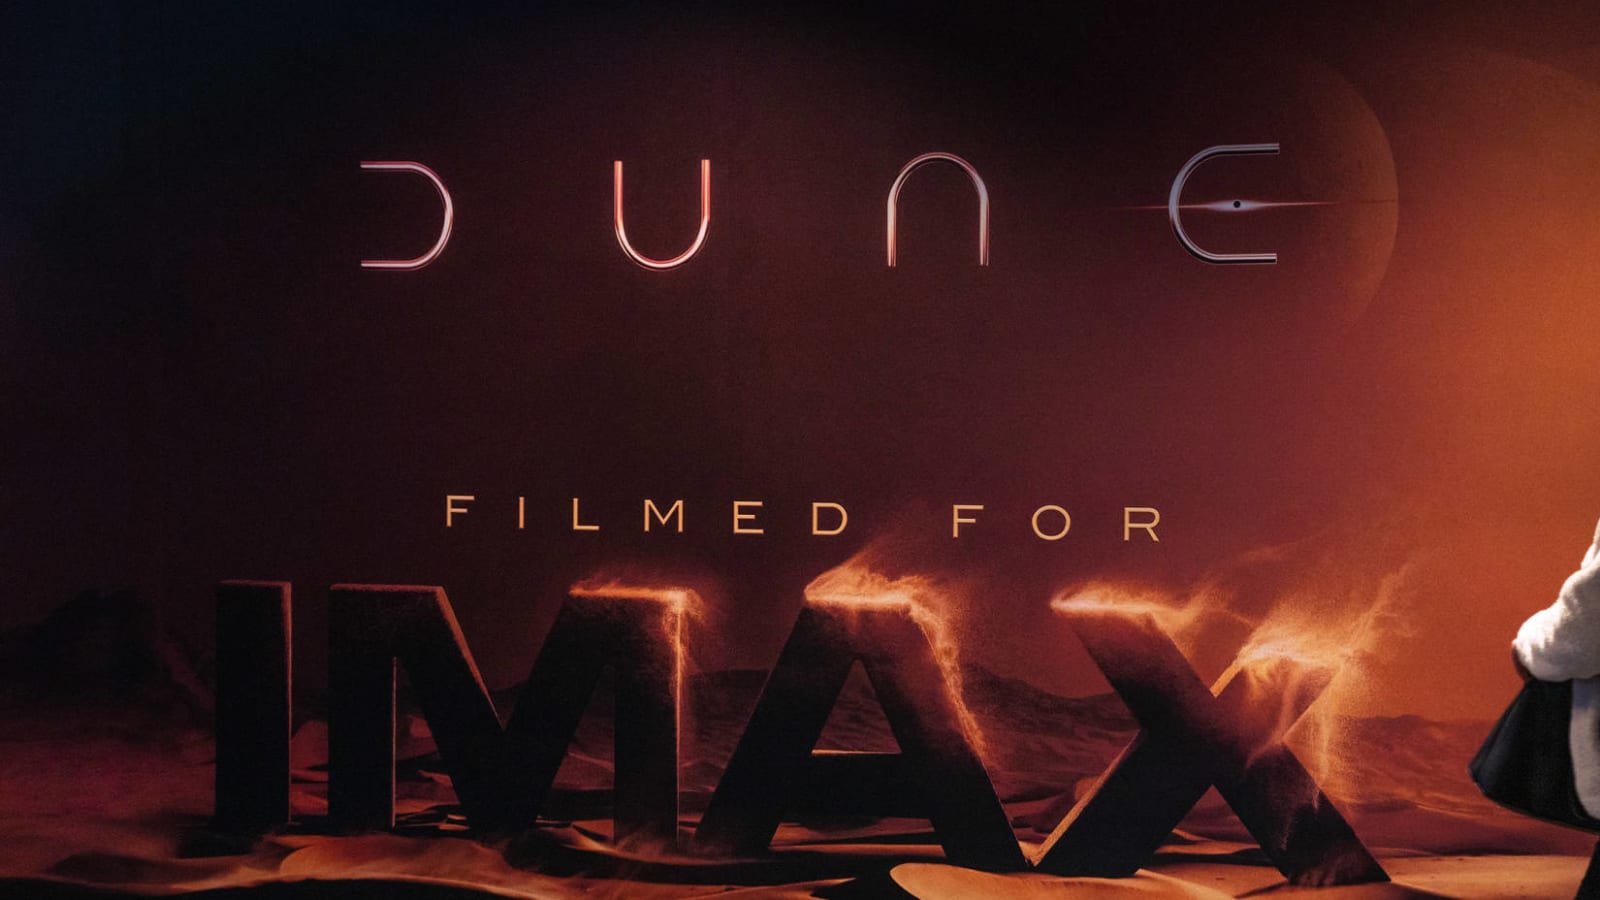 'Dune' sequel is officially happening: 'We're excited to continue the journey!'